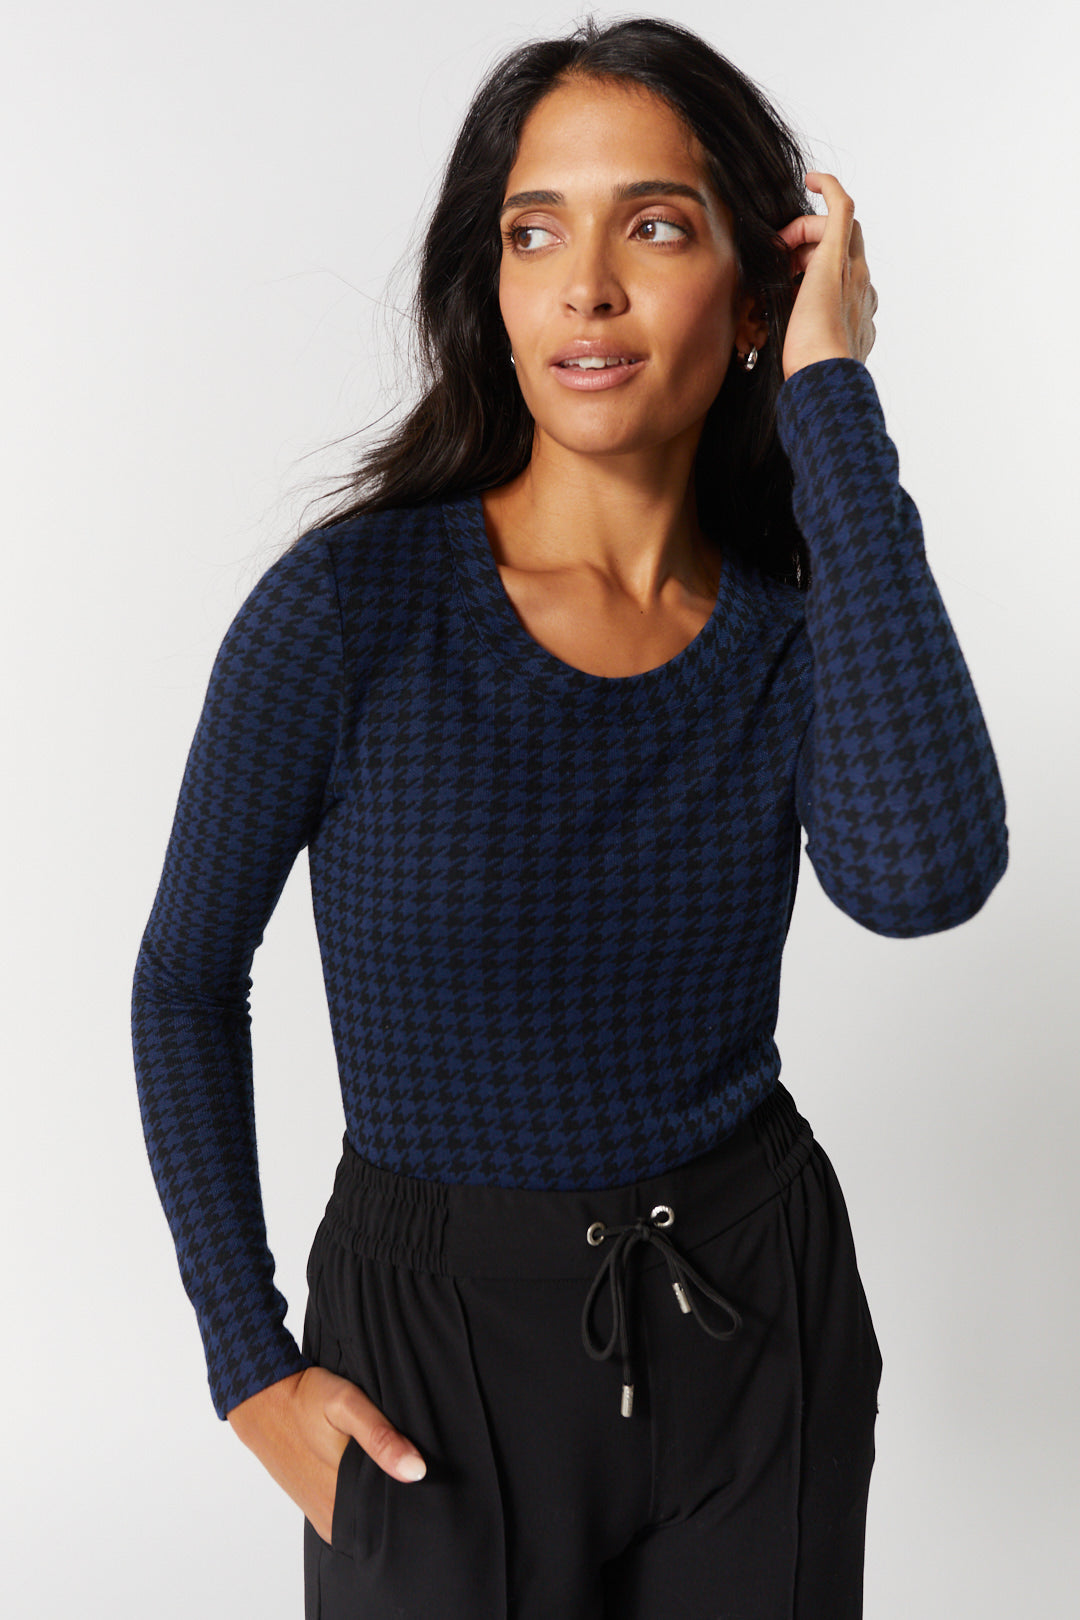 Blue-black sweater with houndstooth patterns | Nash